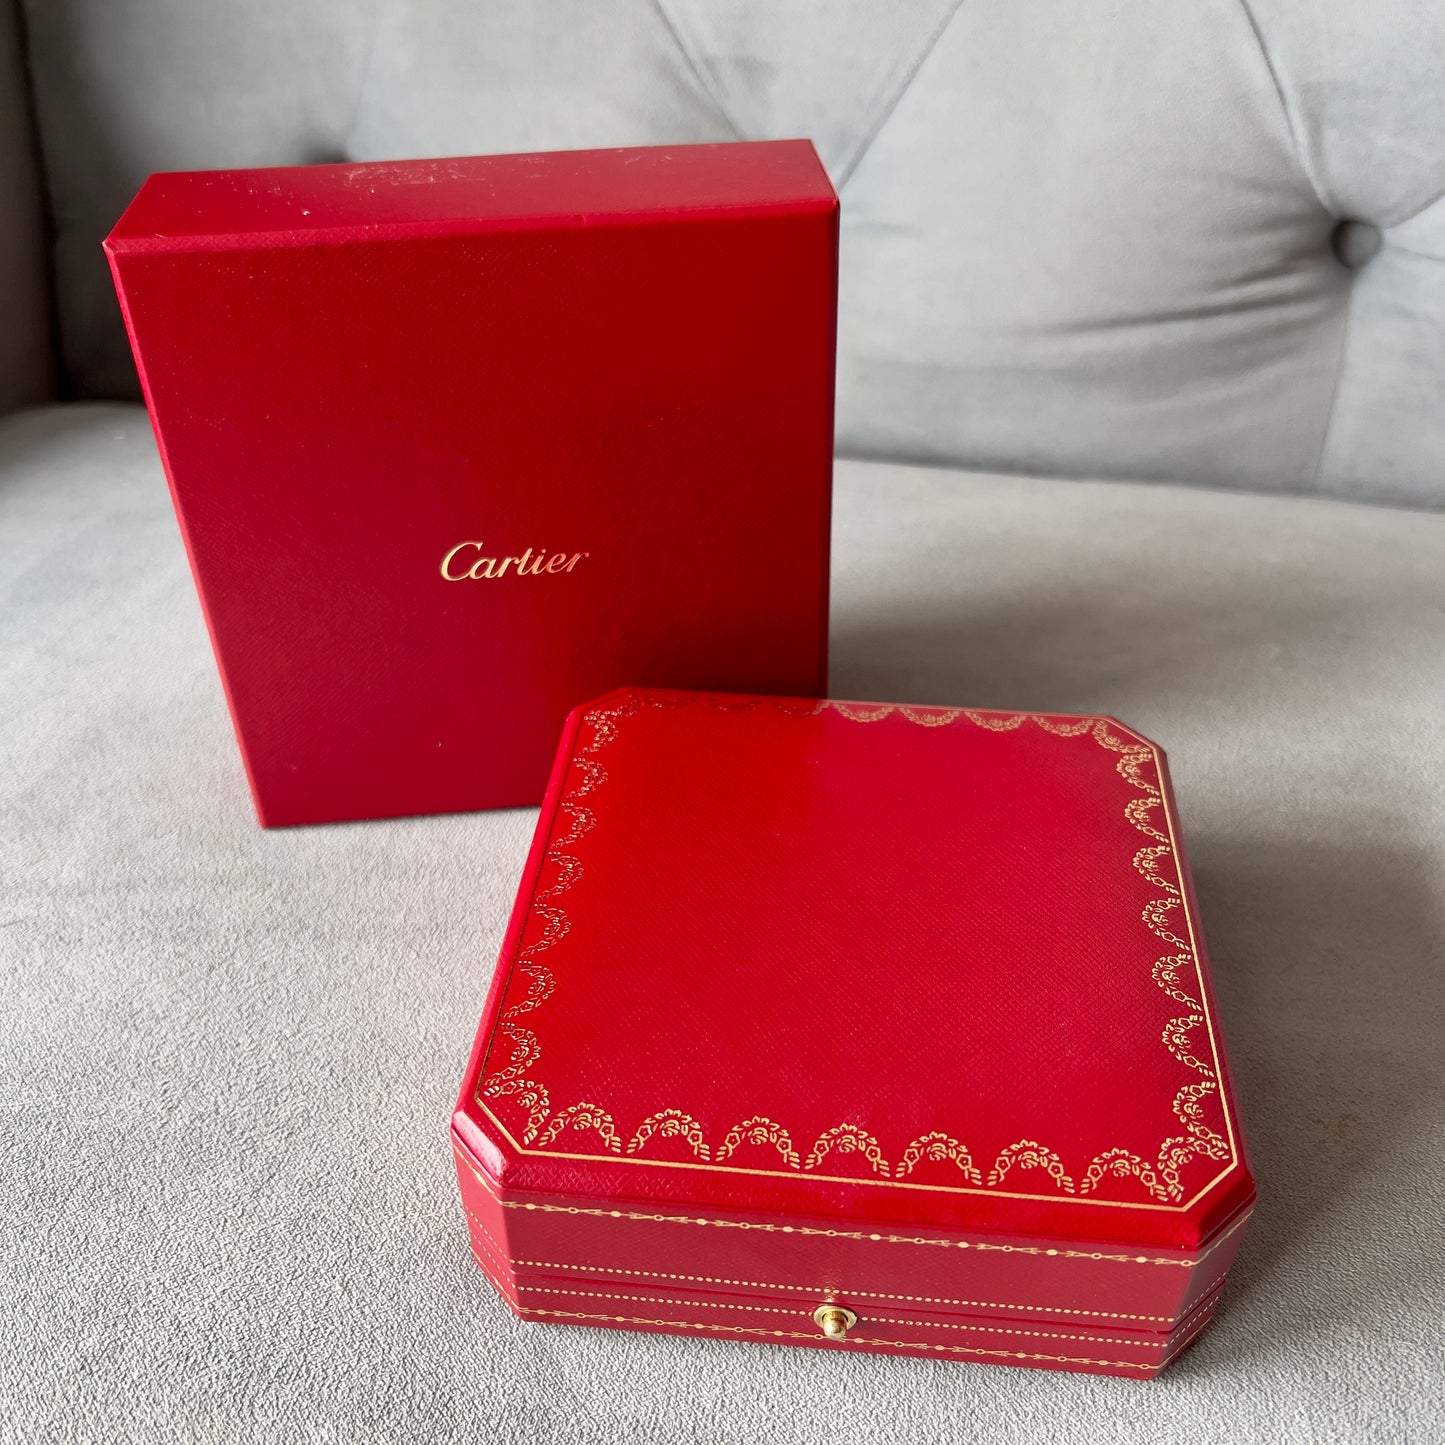 CARTIER Necklace Chain Box + Outer Box 5.25x5.25x2 inches